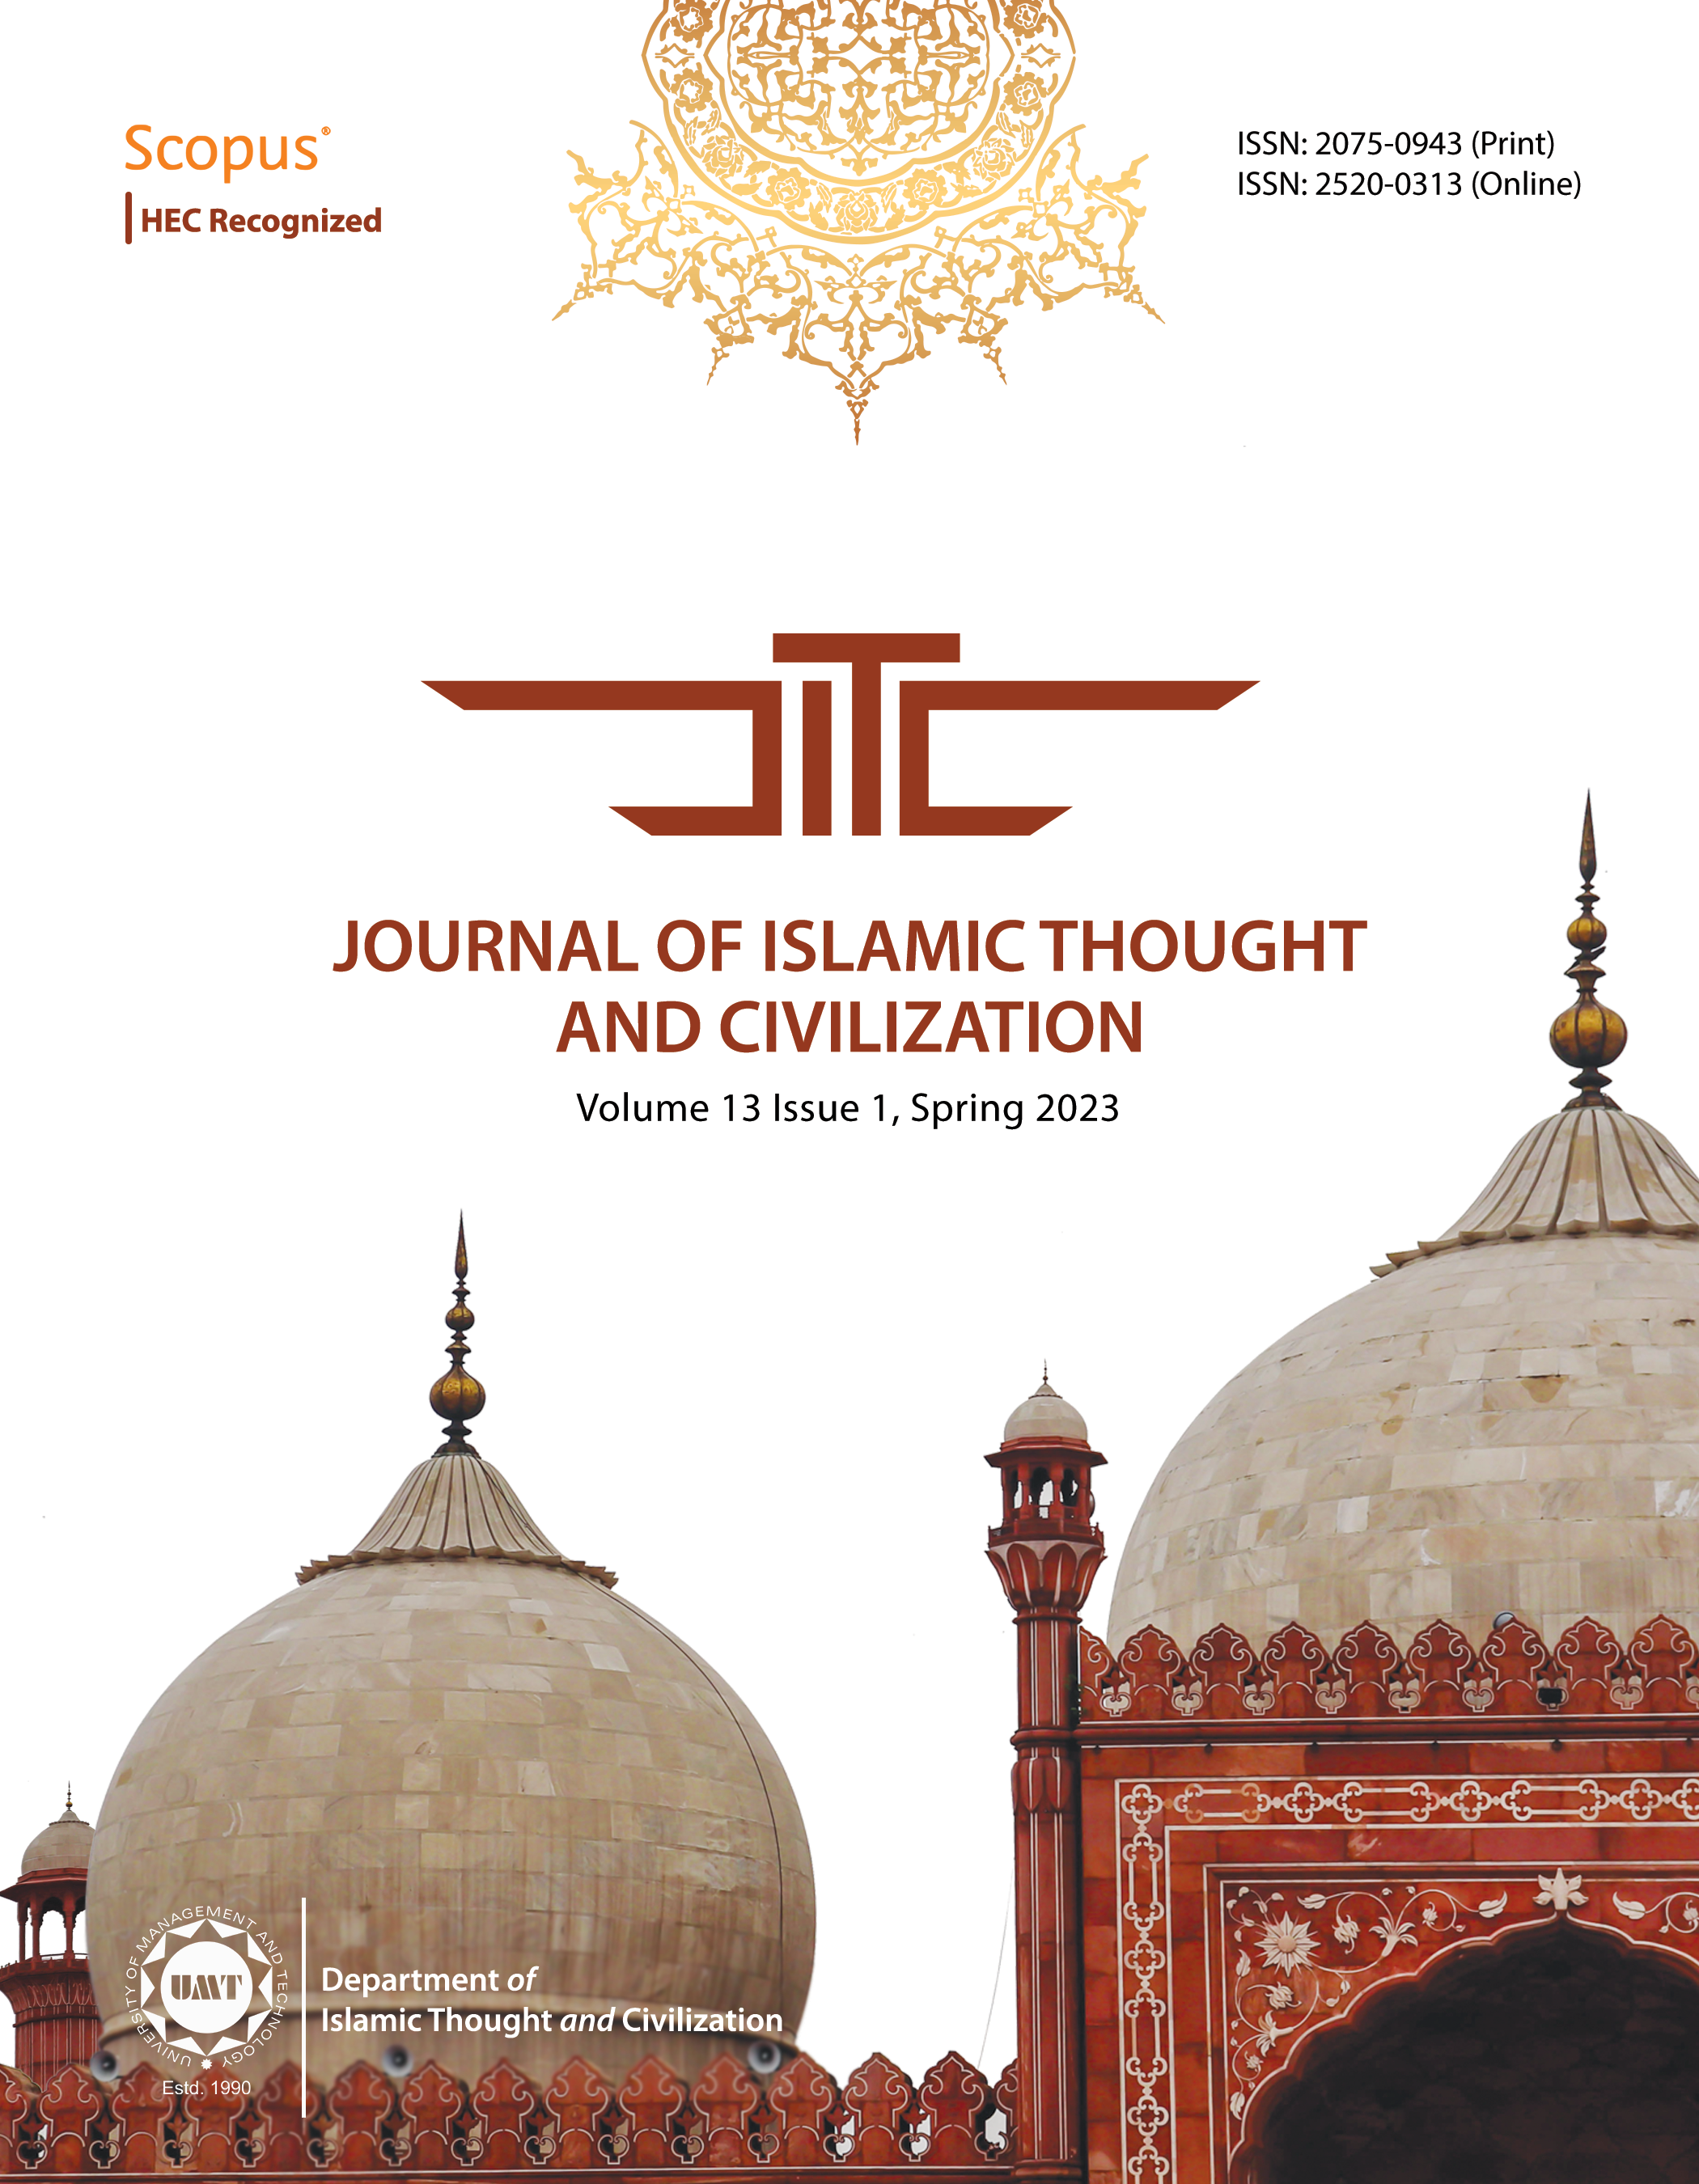 JOURNAL OF ISLAMIC THOUGHT AND CIVILIZATION (JITC)